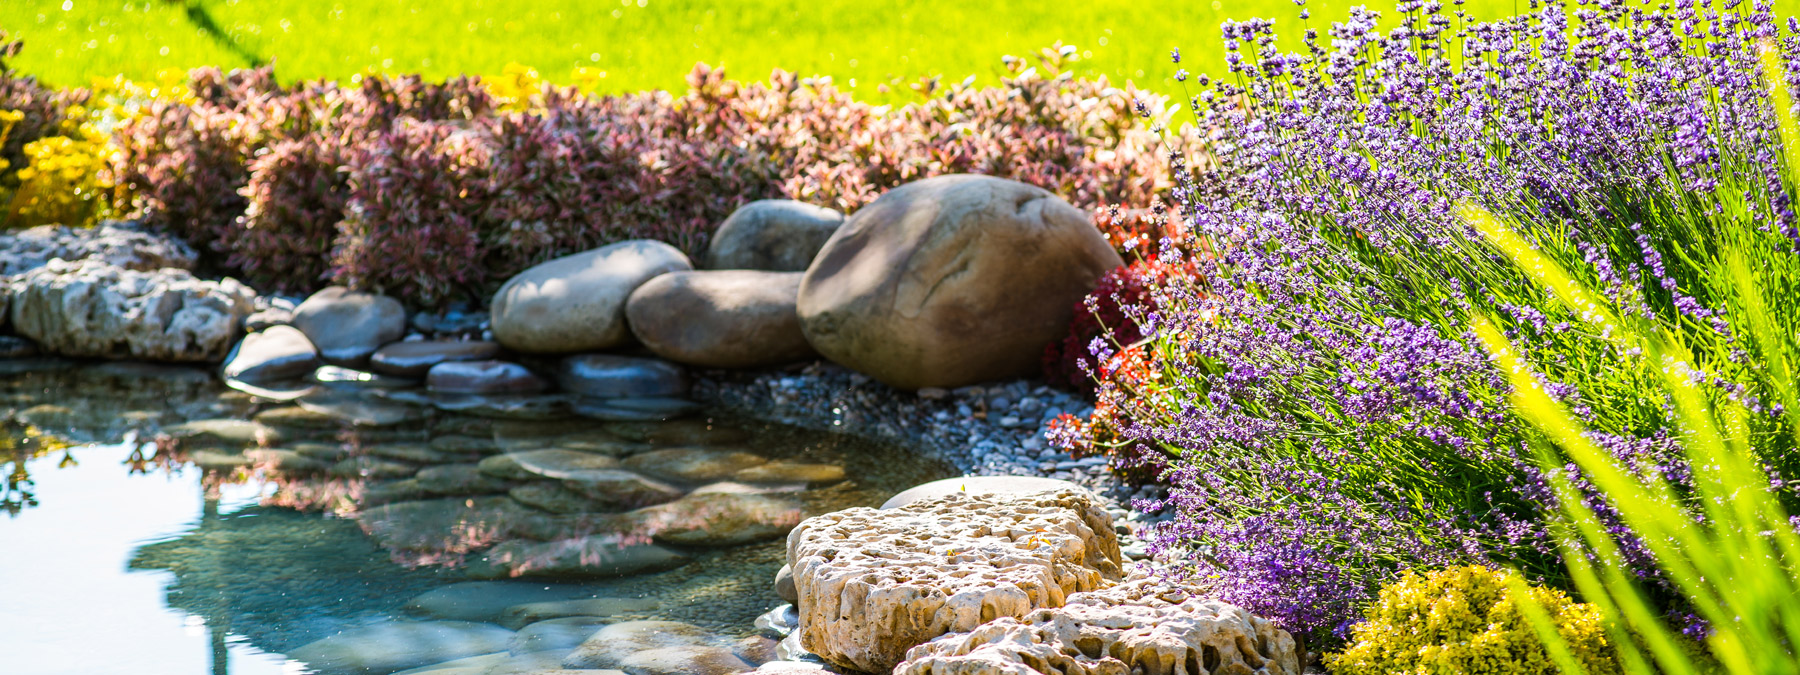 A garden with rocks and plants in the water.